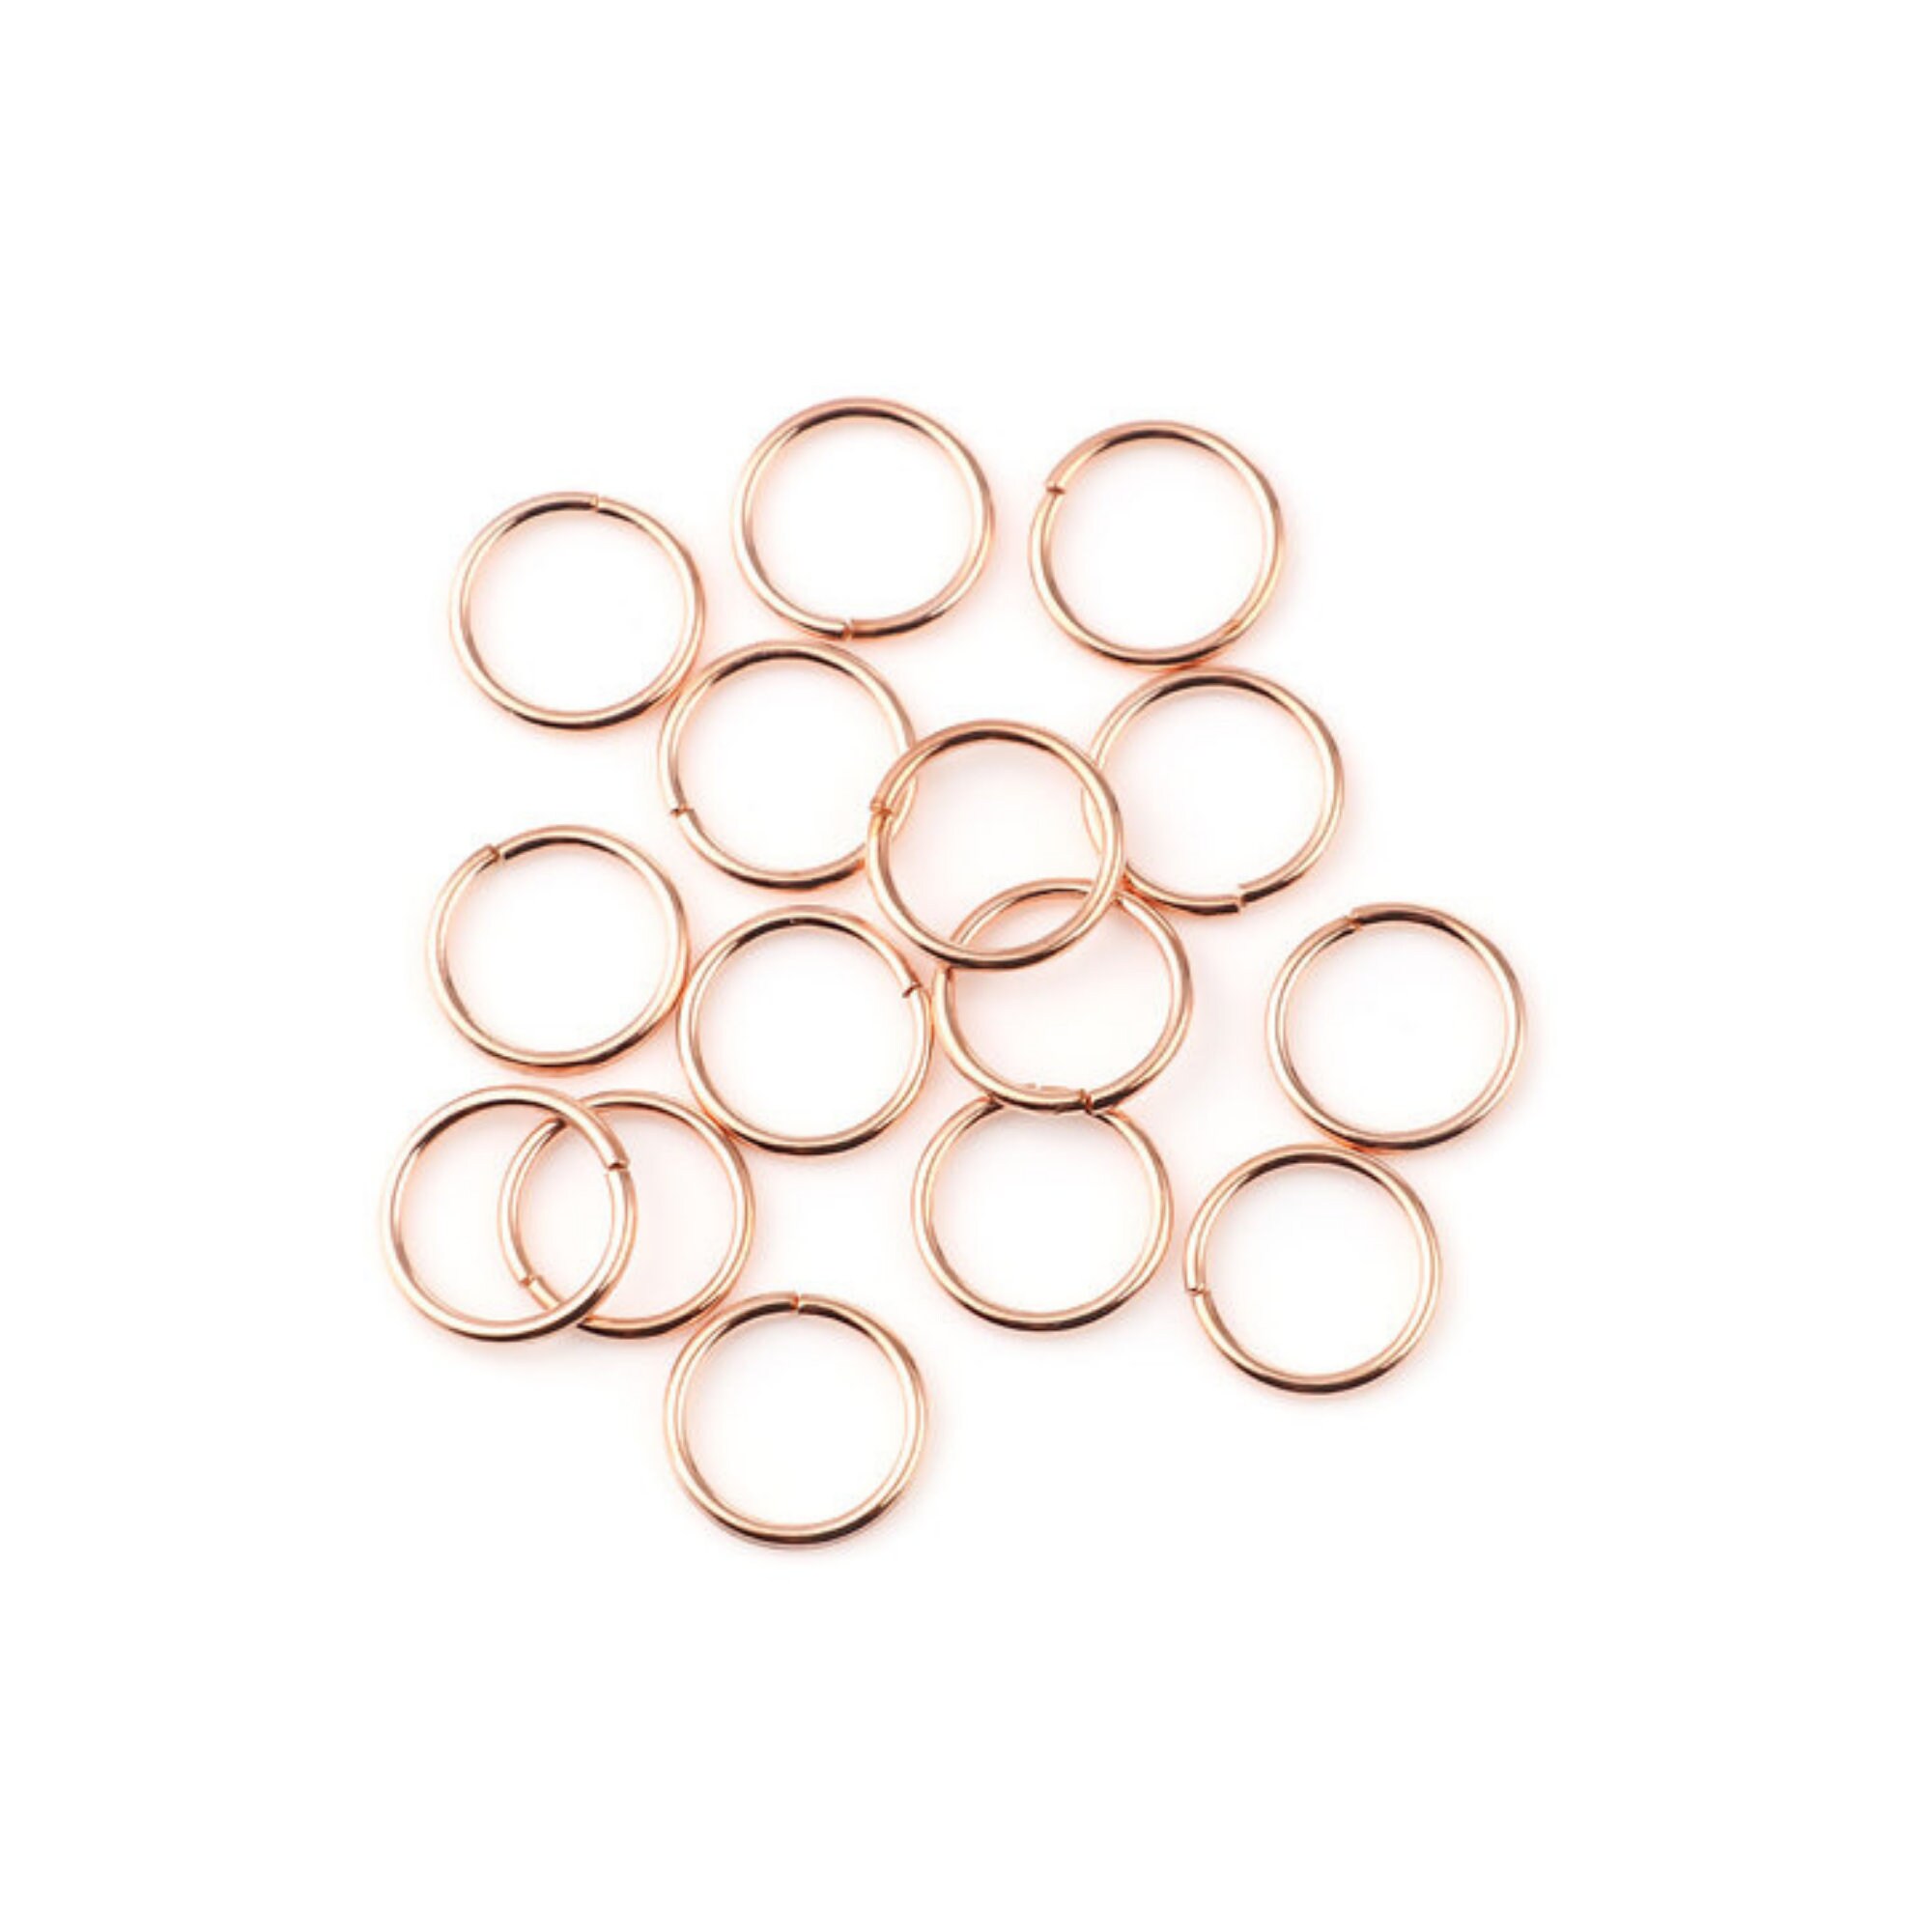 6 Size Rose Gold Iron Jump Rings 1250pcs Jump Lock Rings O Rings Connectors  with Open Tool for Jewelry Making Supplies and Necklace Repair (4mm 5mm 6mm  7mm 8mm 10mm) 